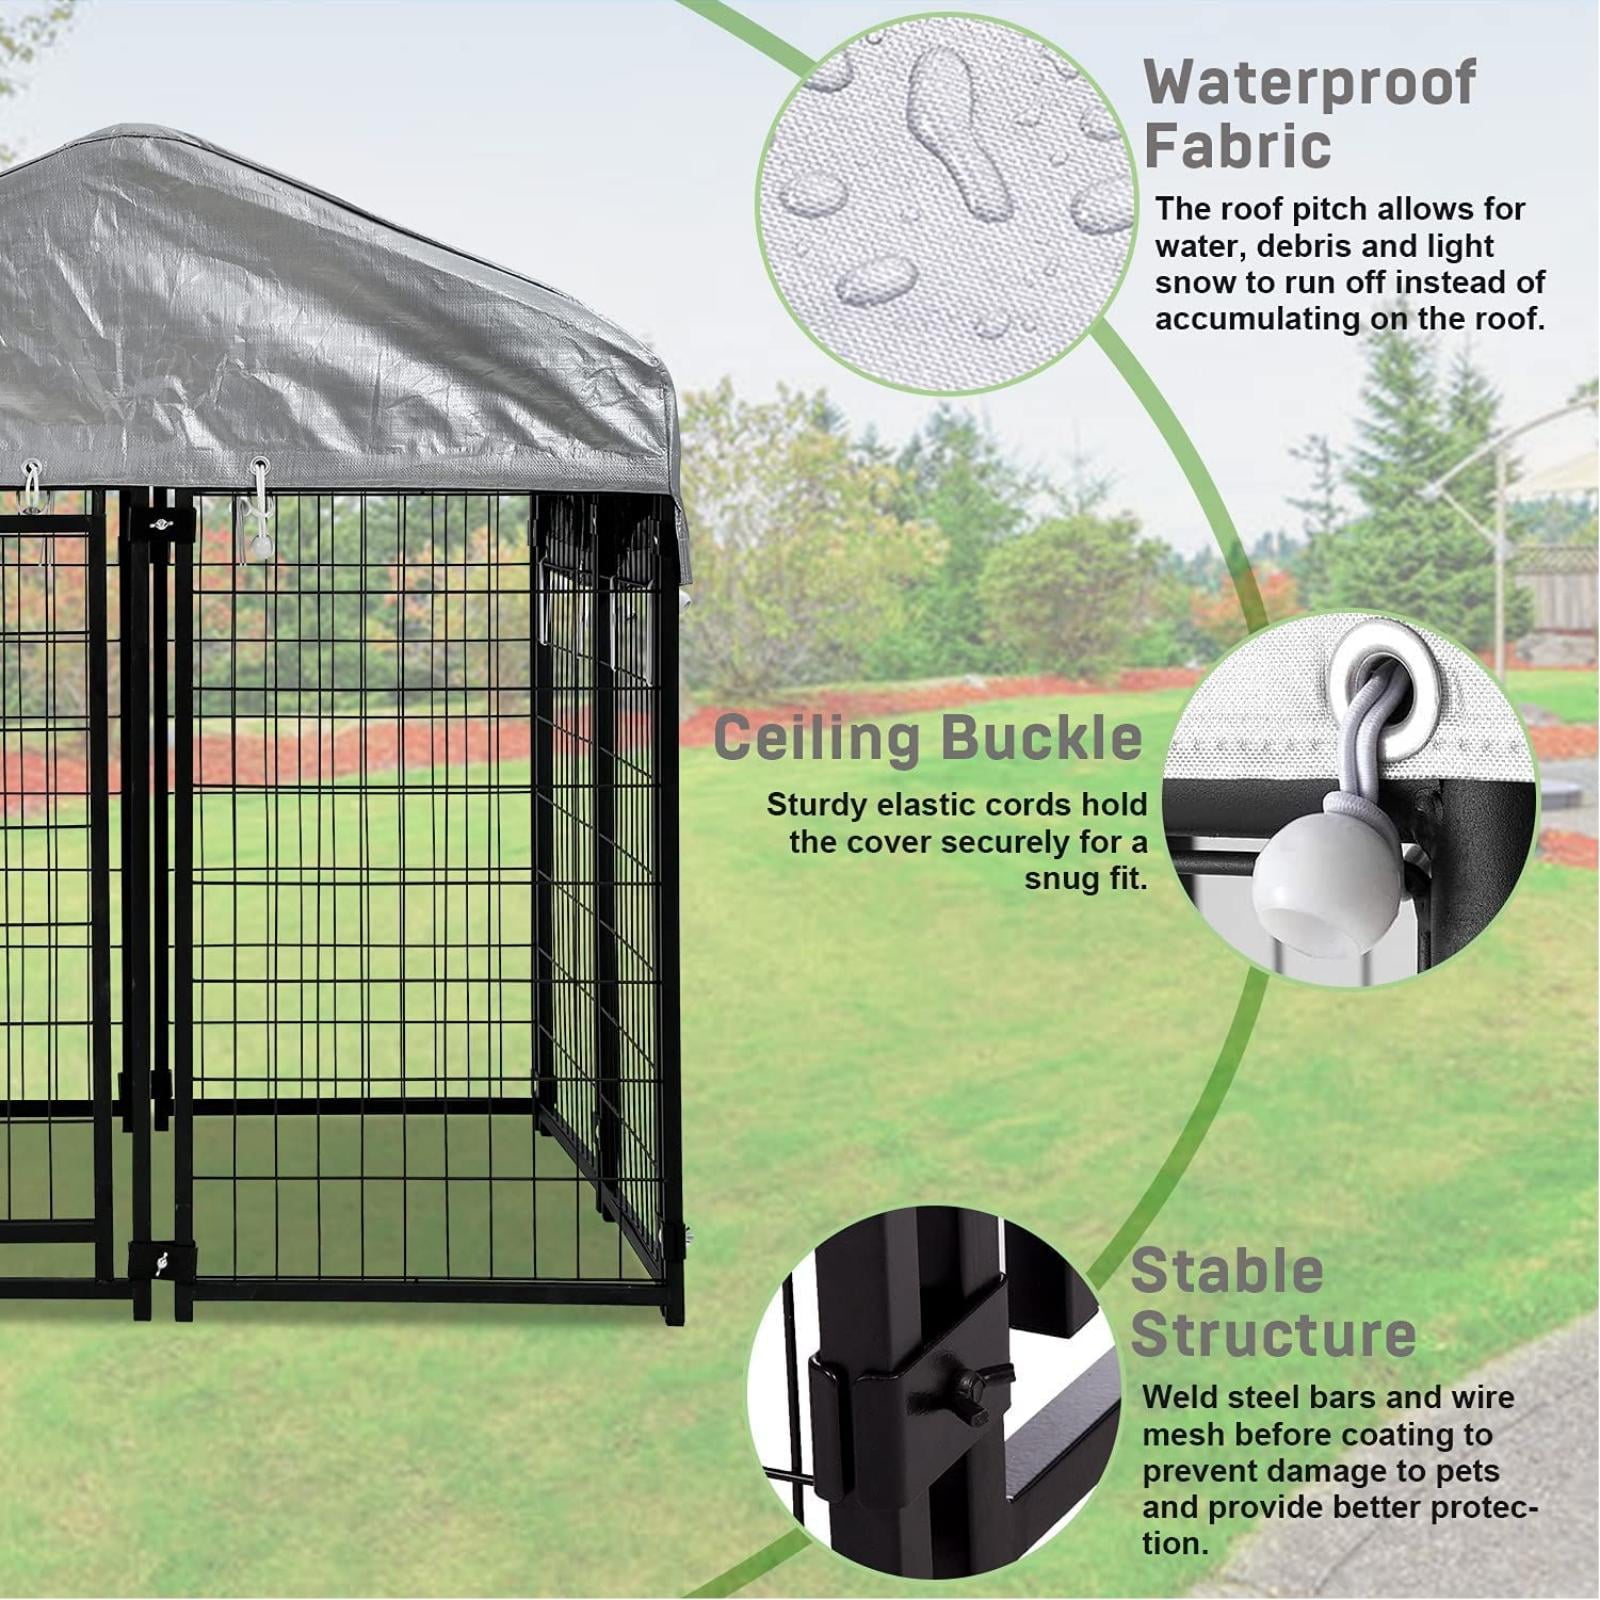 Large Dog Kennel 4'x4'x4.4' Heavy Duty Welded Wire Dog Cage with Water Resistant Cover， Outdoor Dog House with Mesh Sidewallsand Secure Lock for Large Dogs， Black